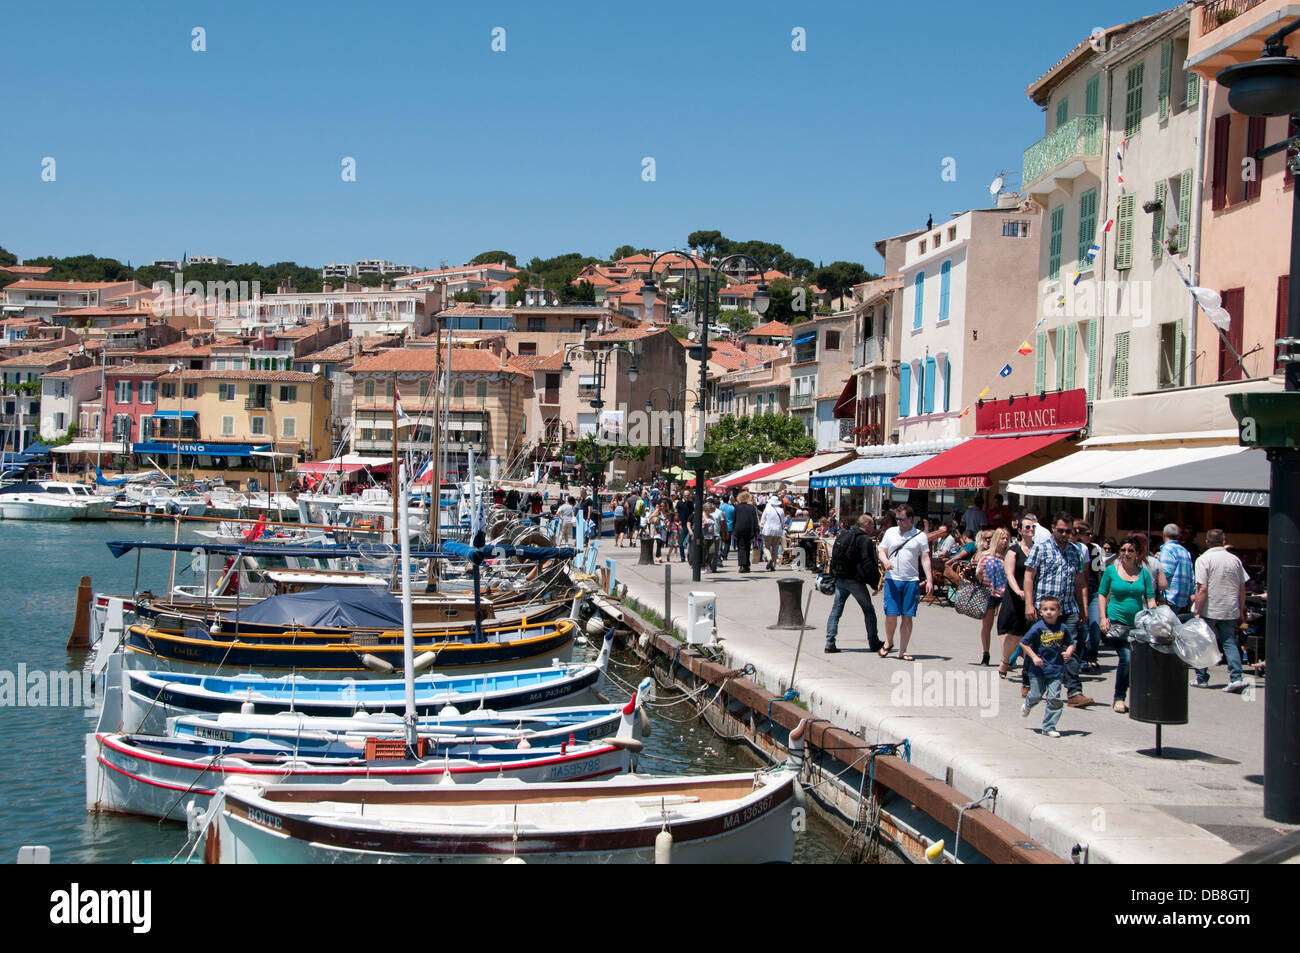 Cassis Old Vieux Port Harbor Provence French Riviera Cote D'Azur France  Mediterranean Stock Photo - Alamy